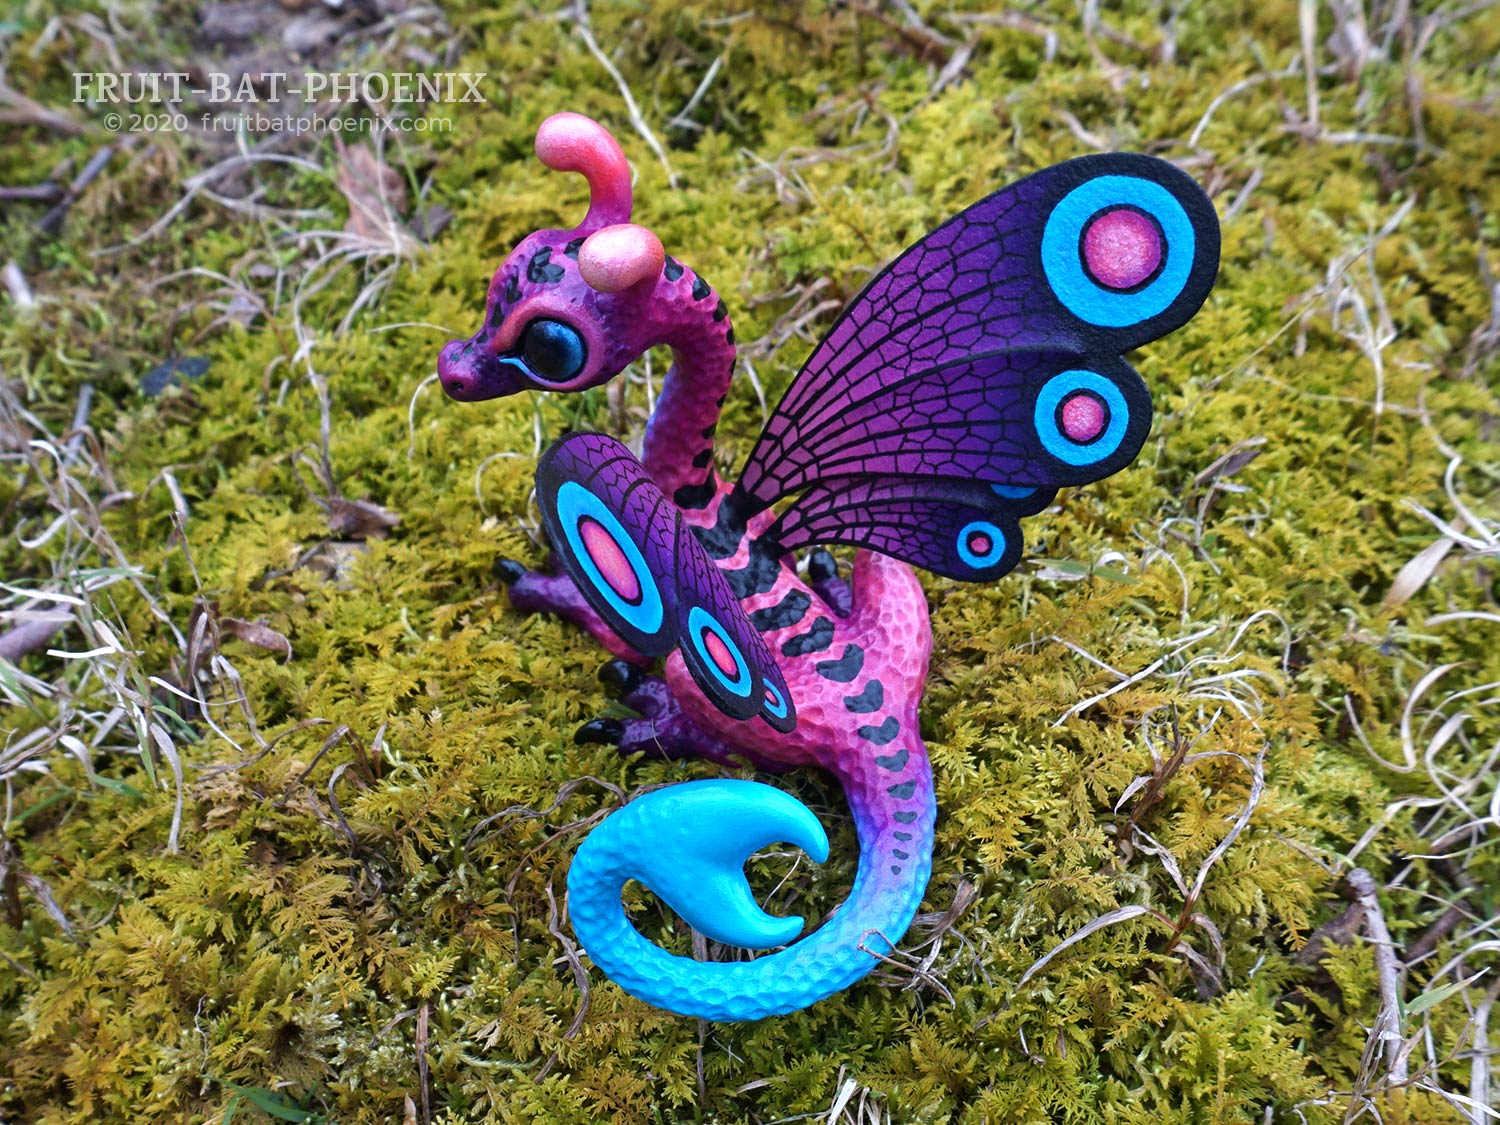 purple dragon sculpture with curled blue tail